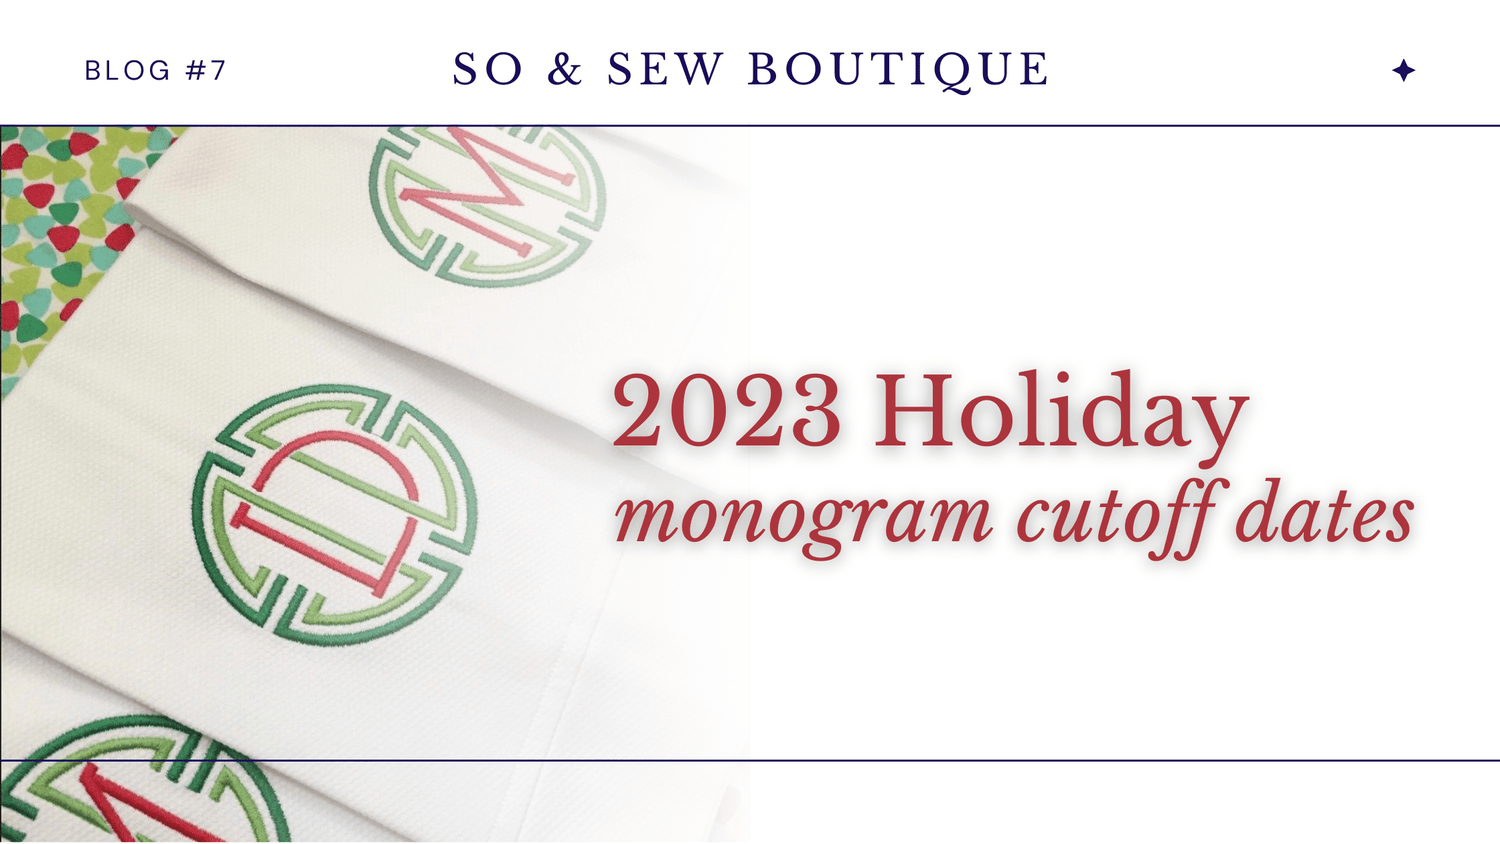 Monogram Cutoff Dates for Christmas Delivery - So & Sew Boutique